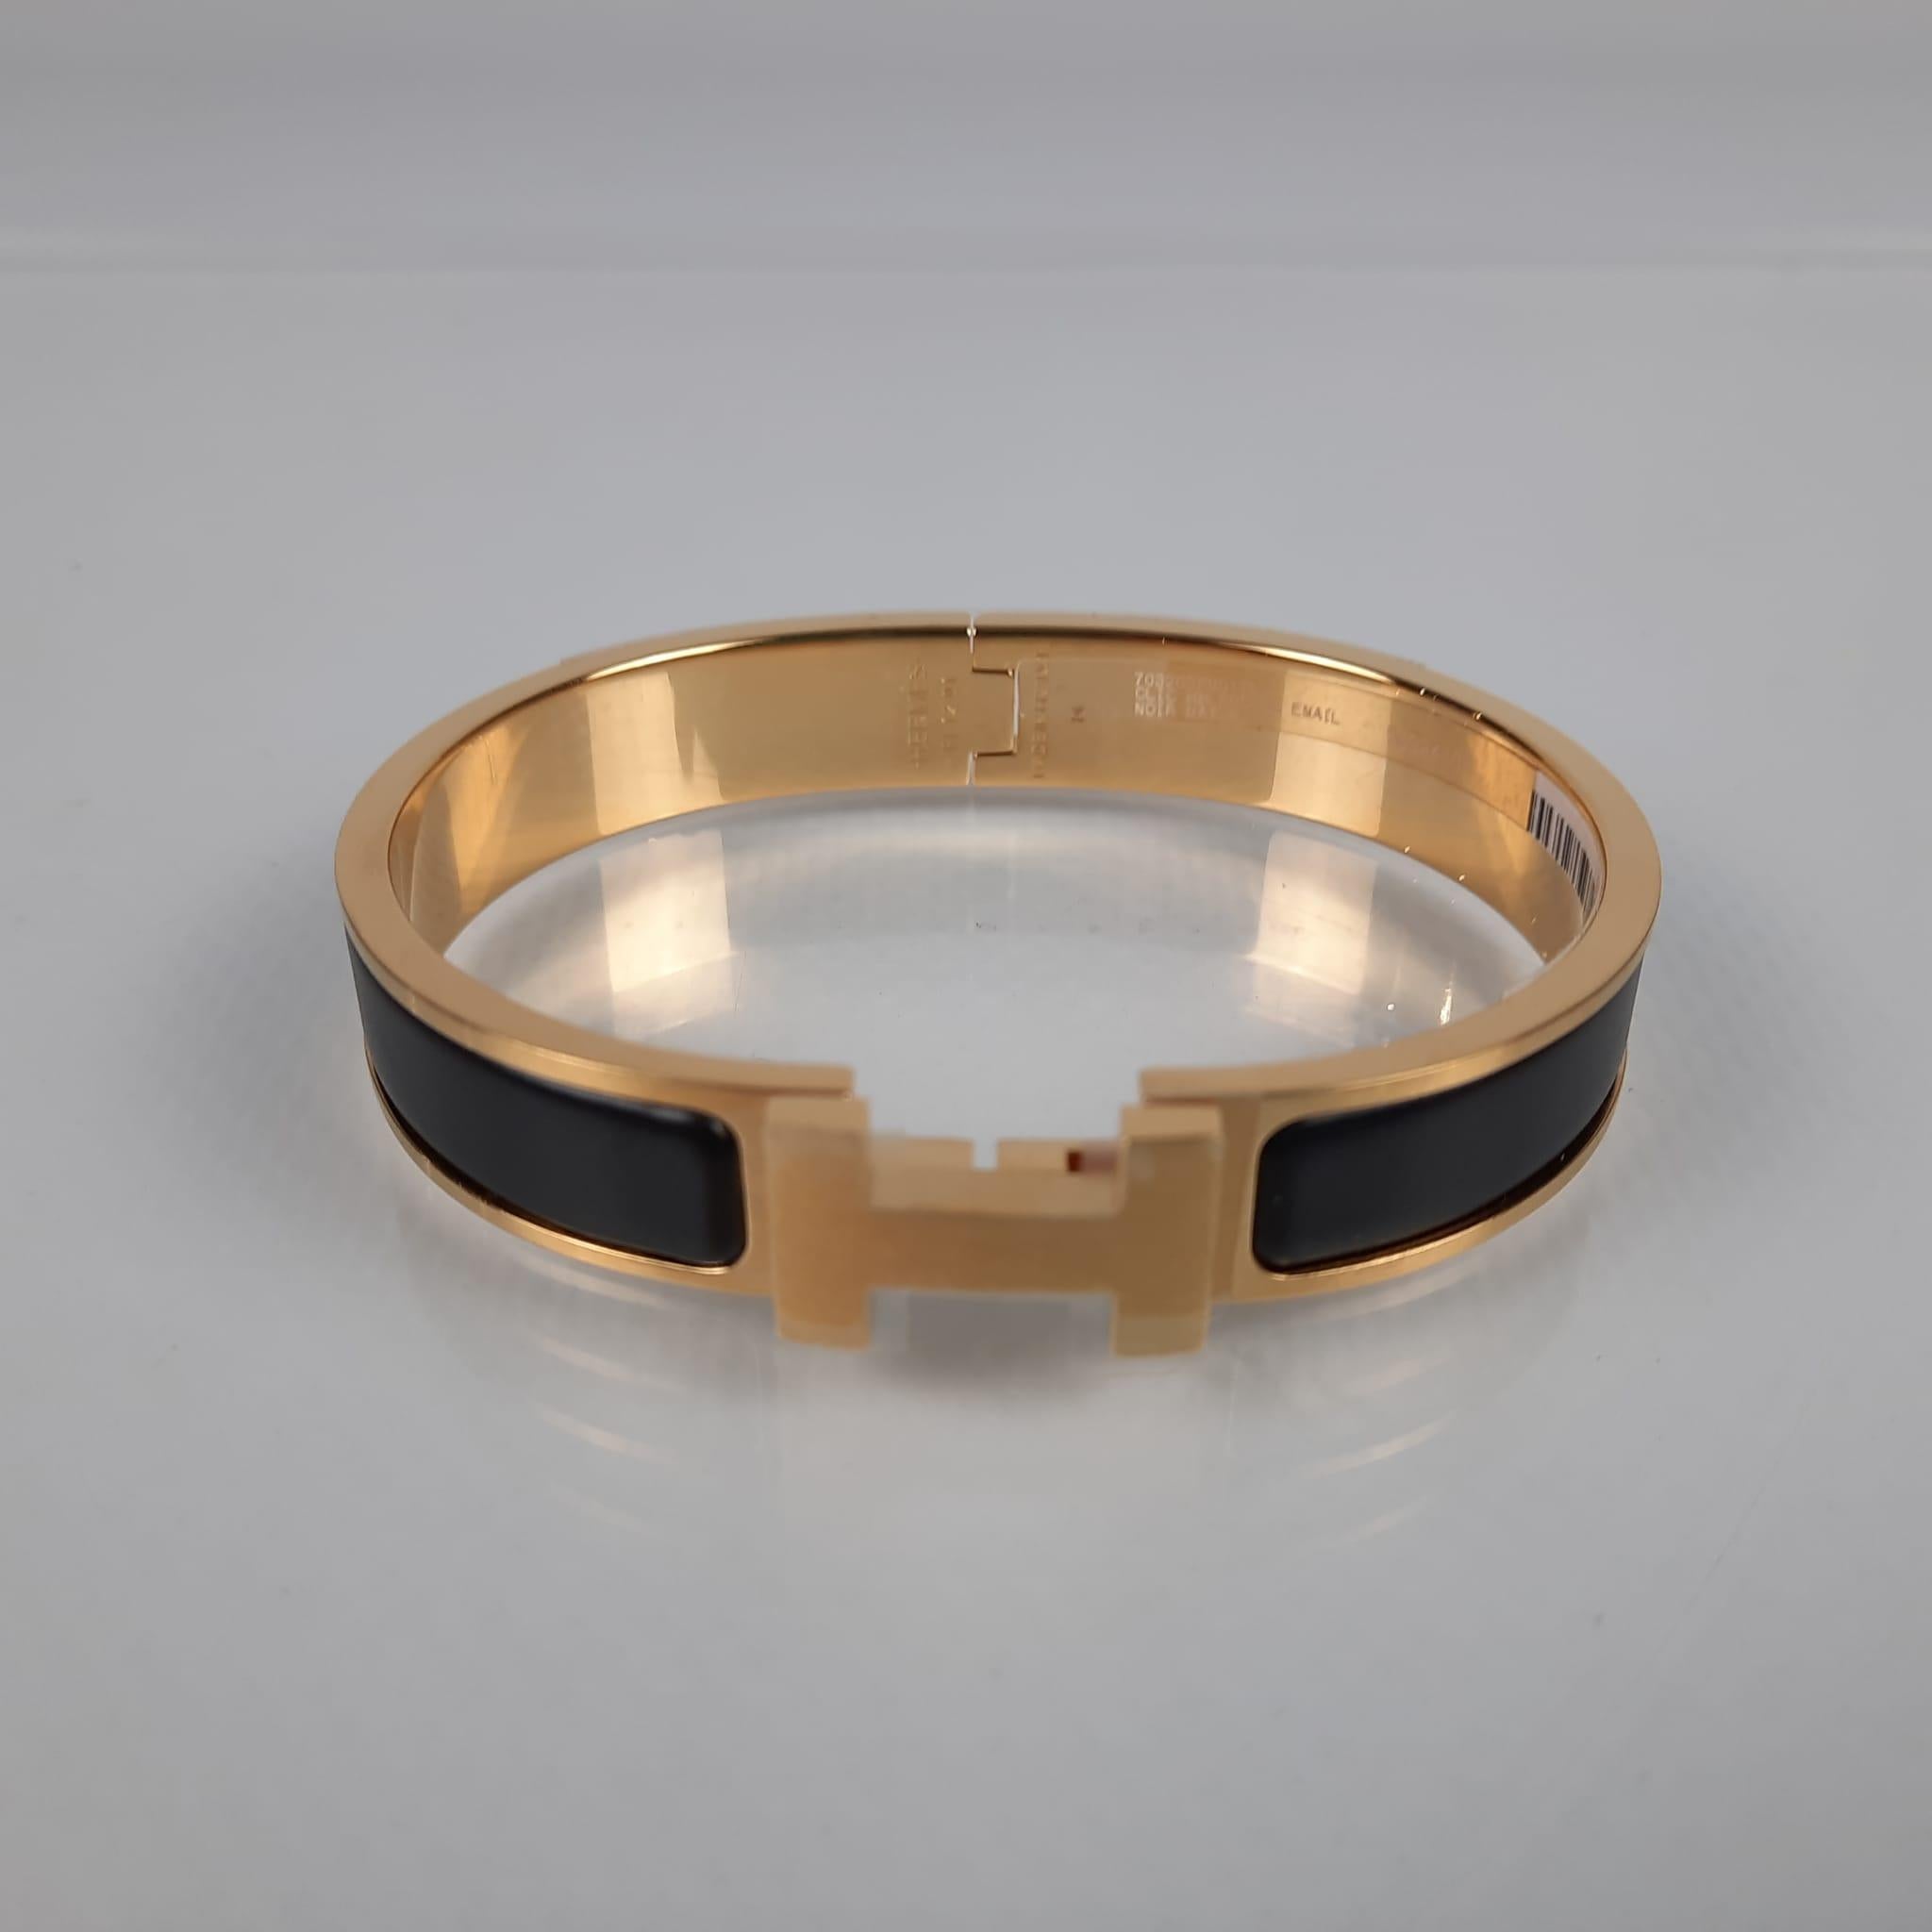 Size 5
Narrow bracelet in matte enamel with brushed gold-plated hardware
Wrist size approx. 18.5 cm  Width: 12 mm